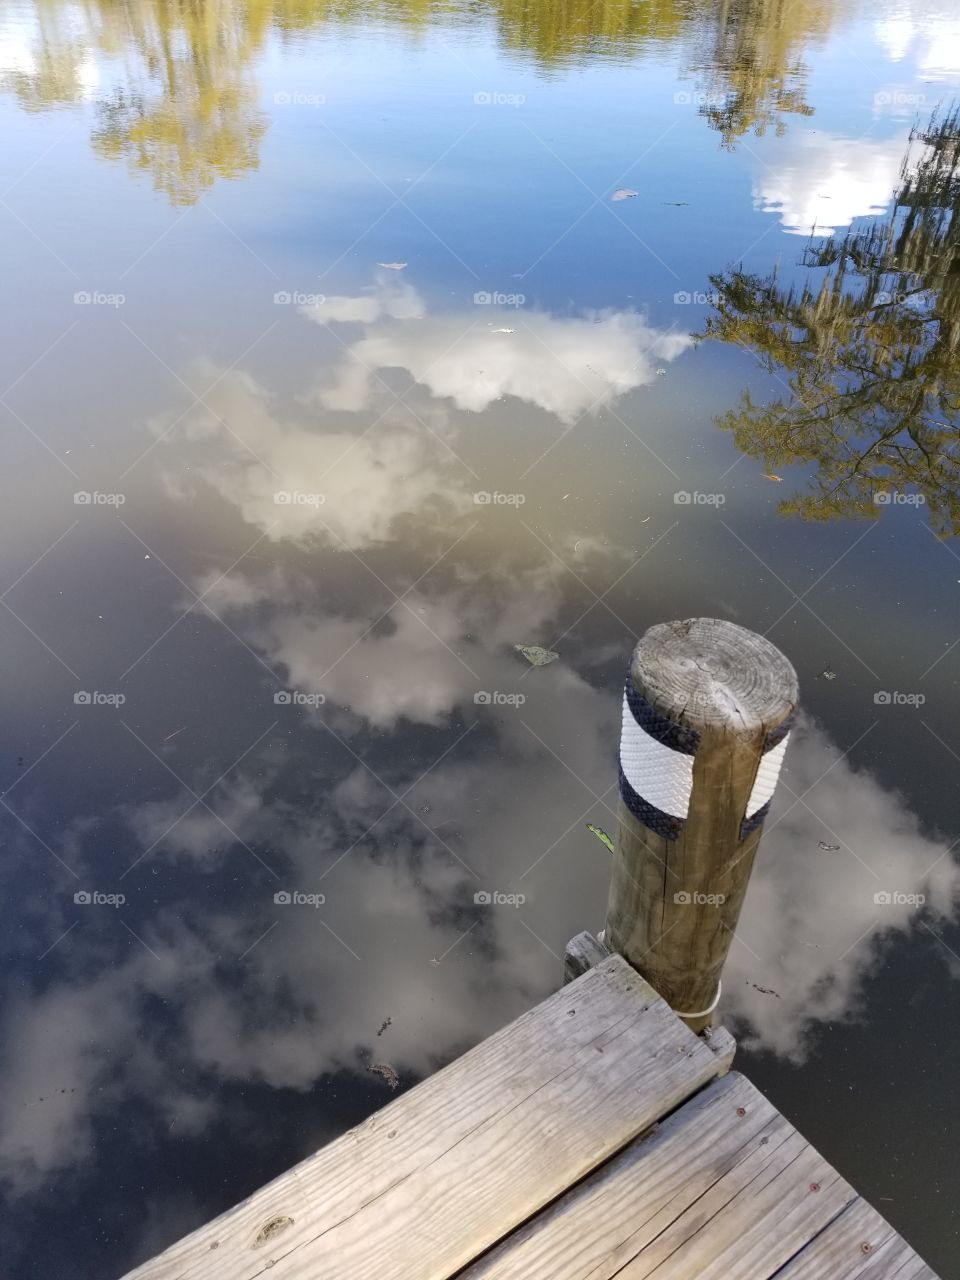 Reflection of clouds by dock